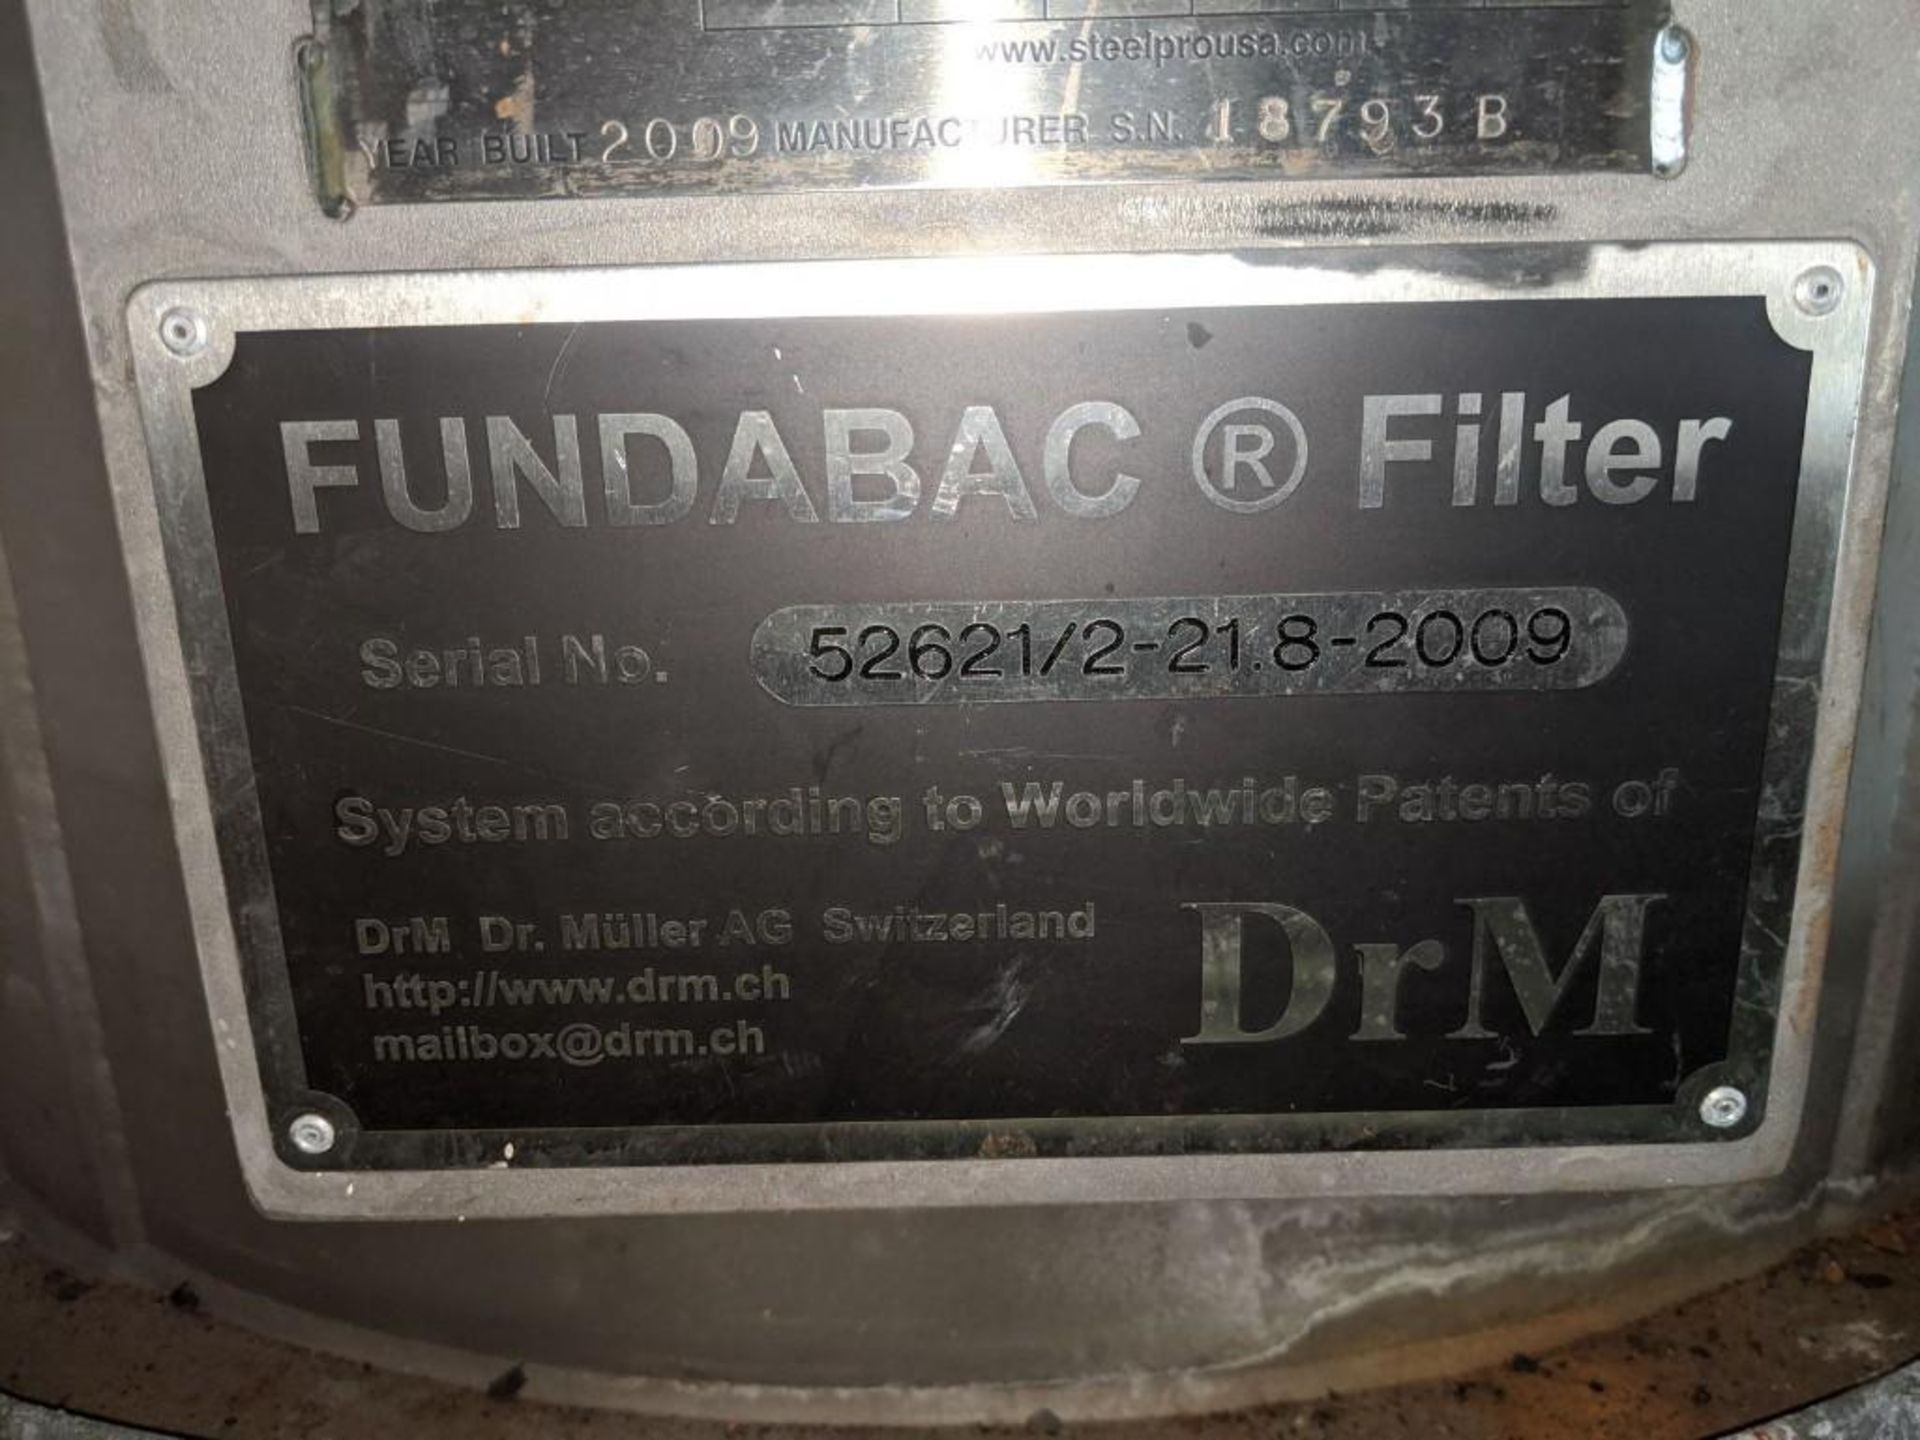 Dr. M Model R-021.8-42-2000/T130Z 21.8 Sq Meter(234 sq ft) Fundabac Candle Filter - Image 3 of 23